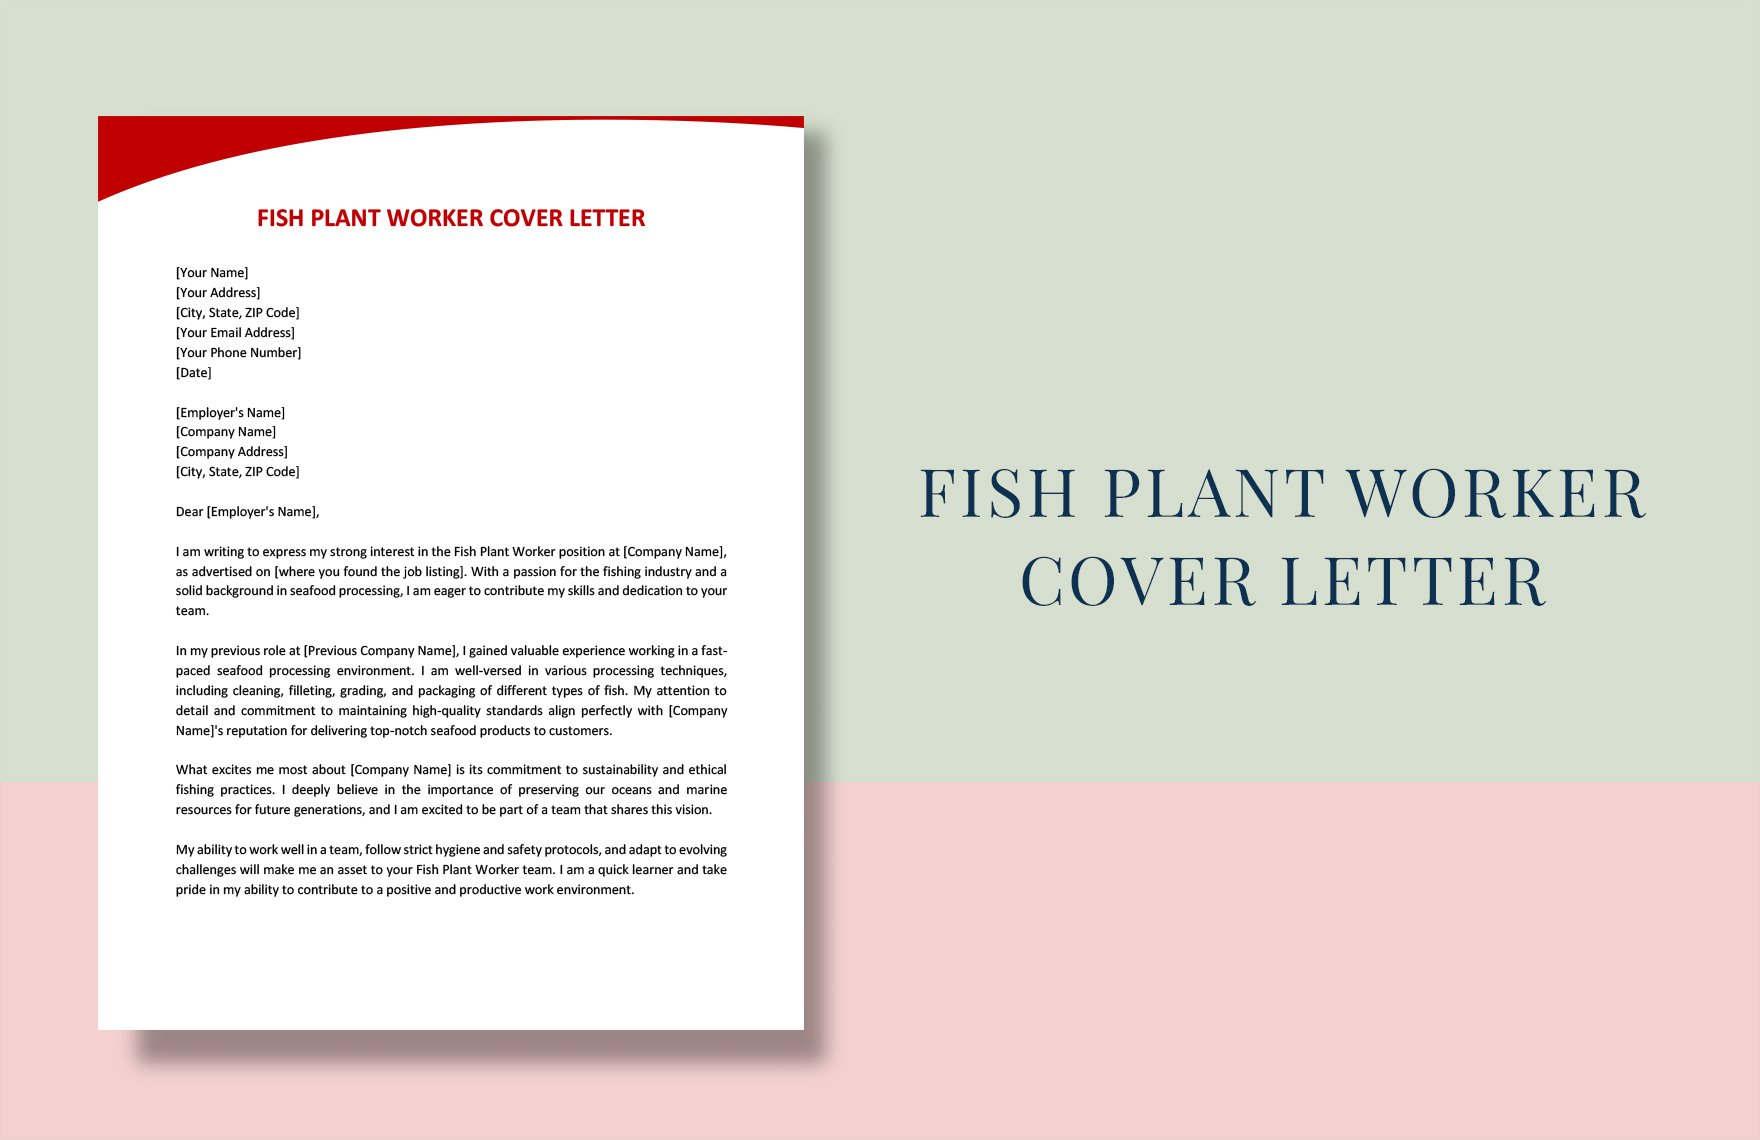 Fish Plant Worker Cover Letter